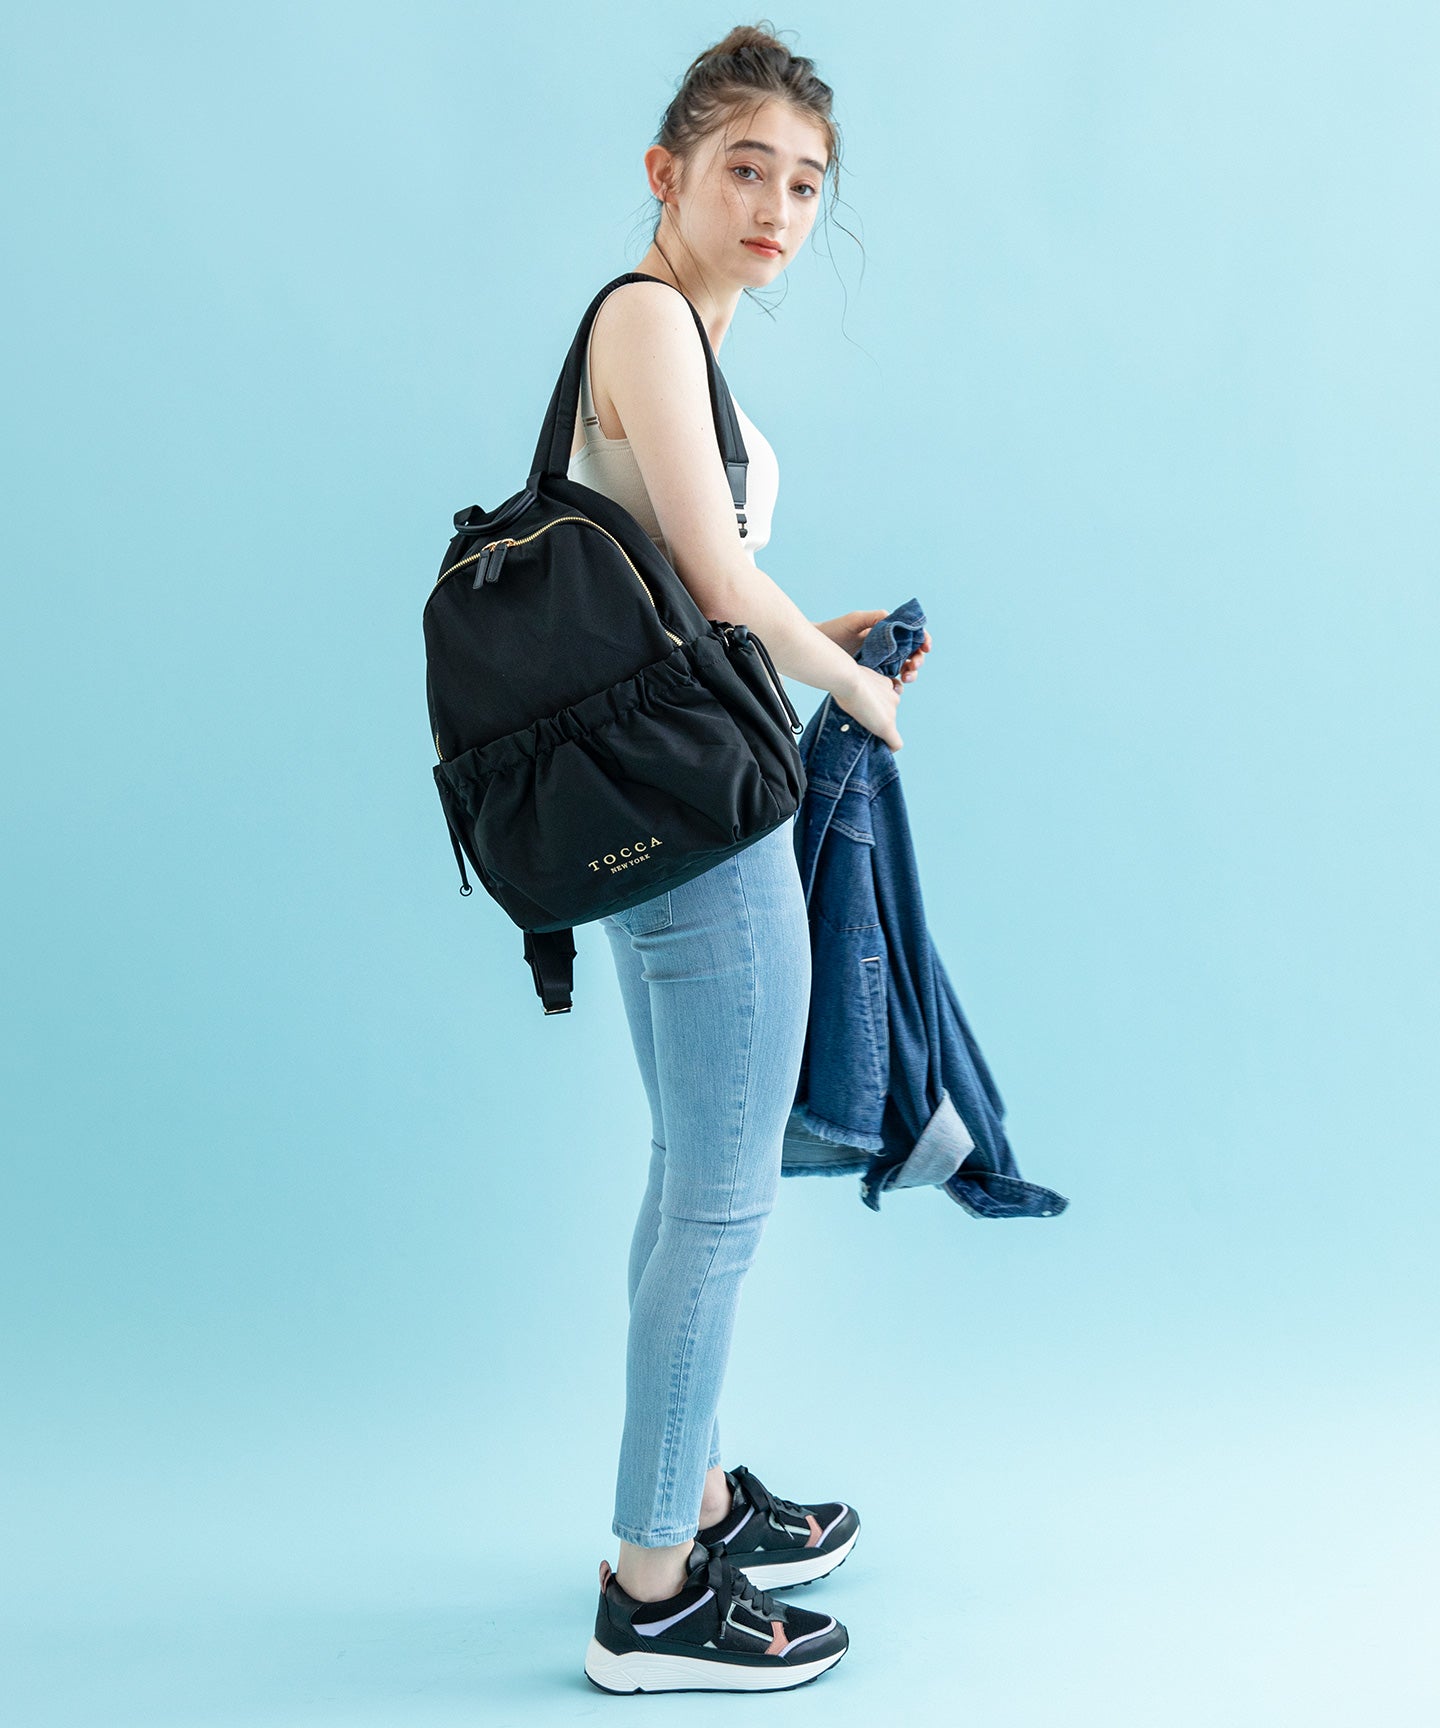 WEB・SOME STORES LIMITED】SANA BACKPACK – TOCCA OFFICIAL SITE